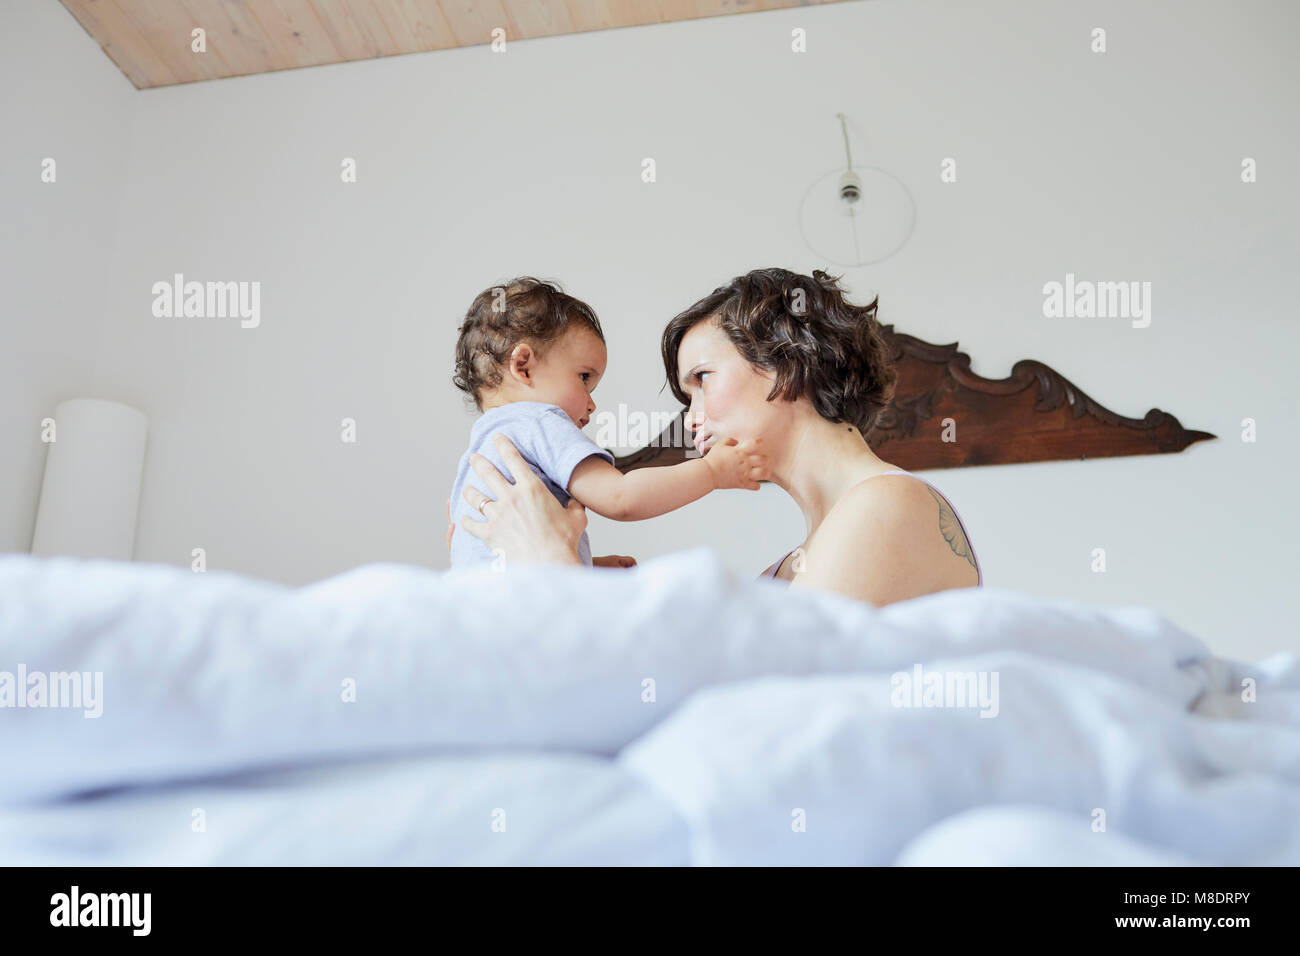 Mother sitting in bed with baby girl, face to face, pensive expression Stock Photo